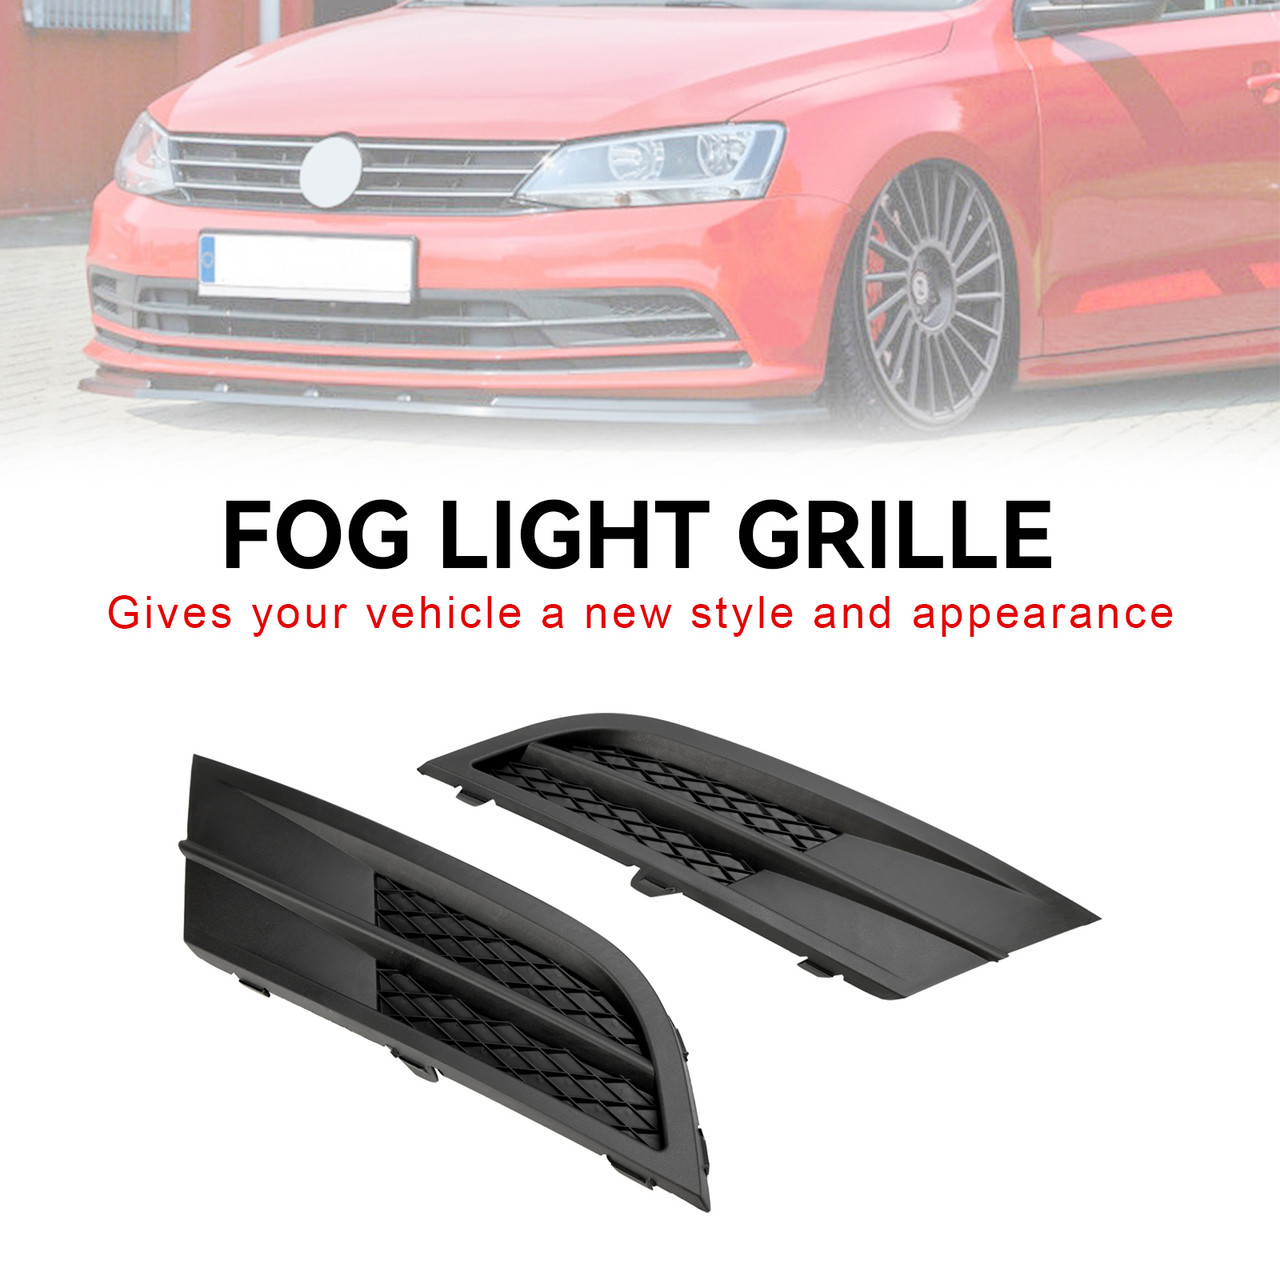 Pair Fog Lamp Cover Grille Grill Fit Volkswagen Jetta 1.4L 2015-2018